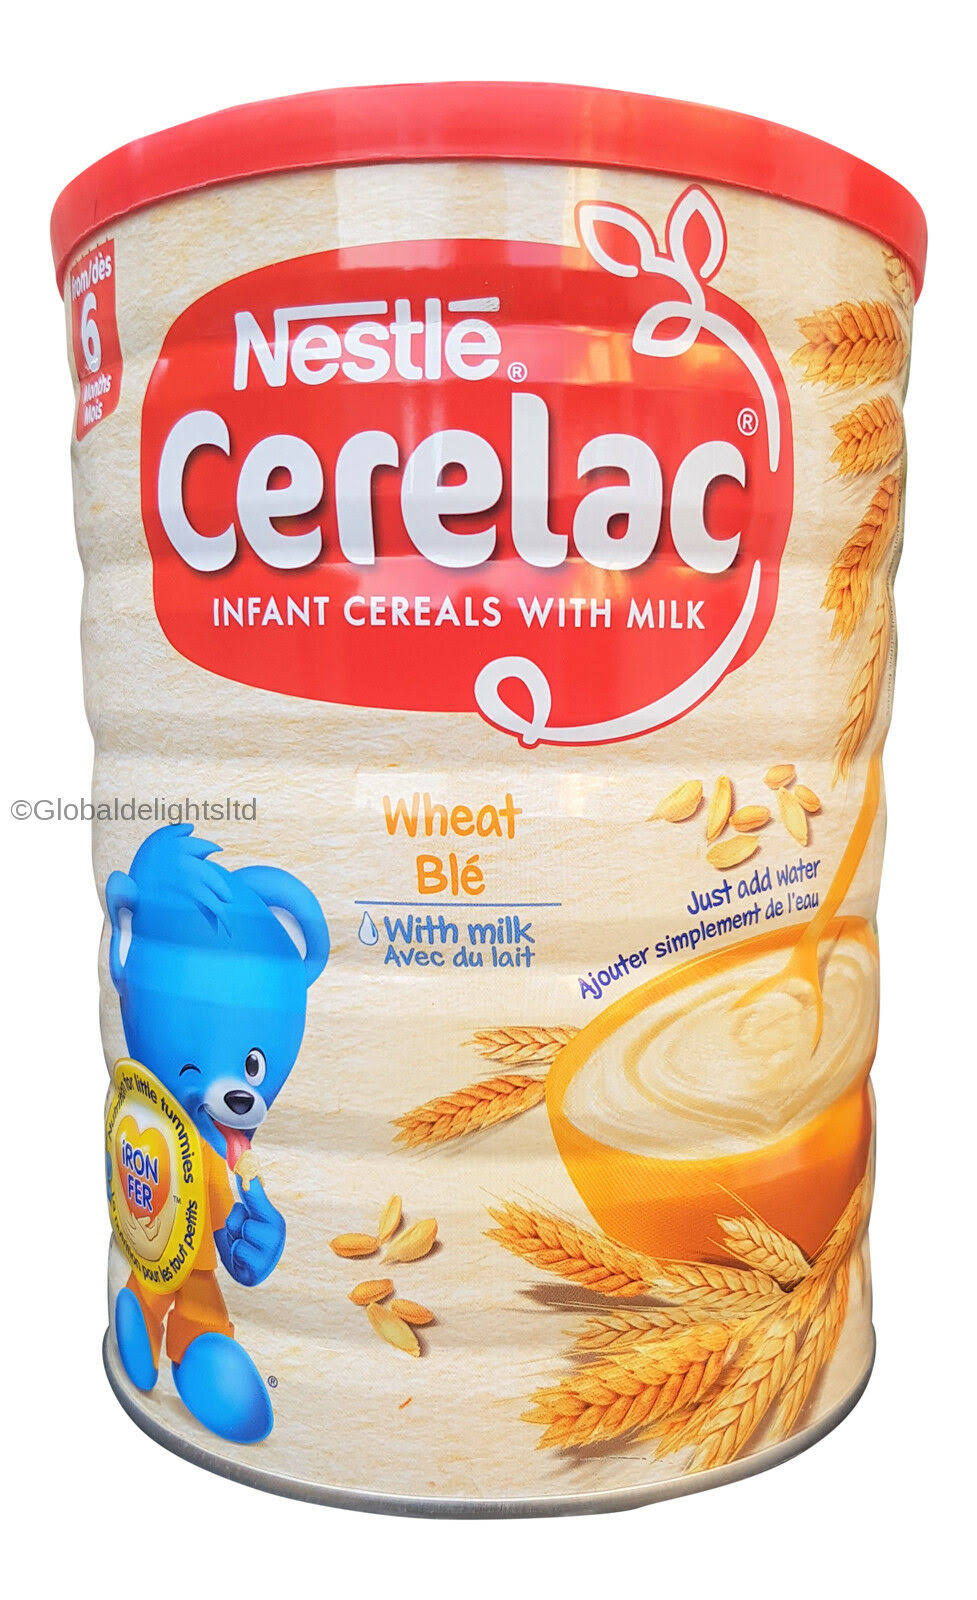 Nestle Cerelac Infant Cereal - Wheat with Milk